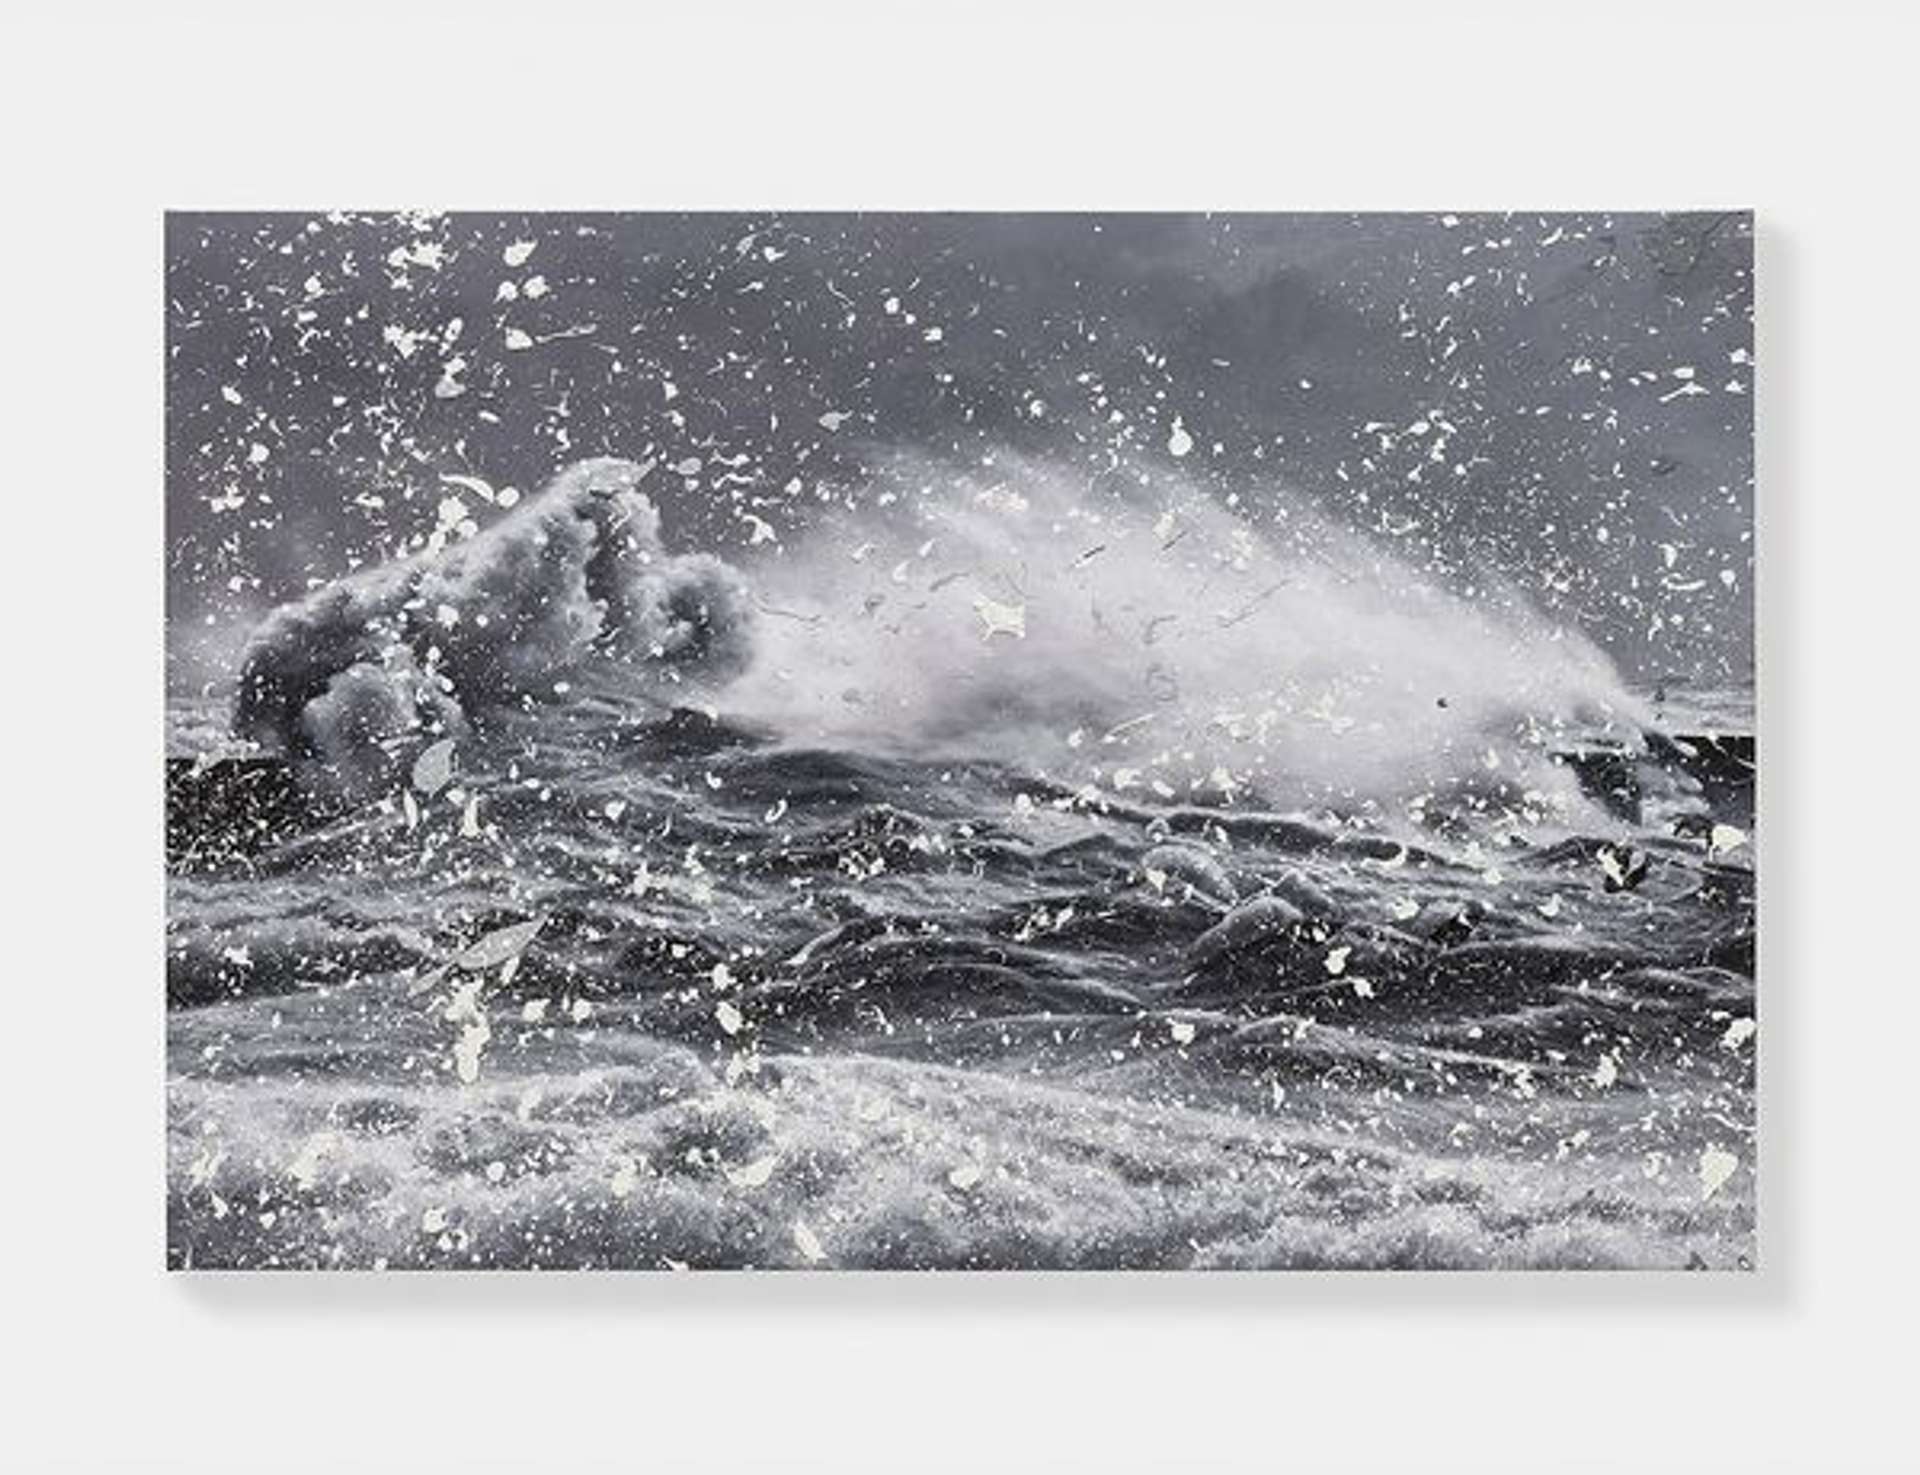 An image of the painting Cyclone by Damien Hirst, showing a photorealistic large wave emerging from the sea. The water gushes upwards, and a large amount of white and grey paint splatter partly covers the work.